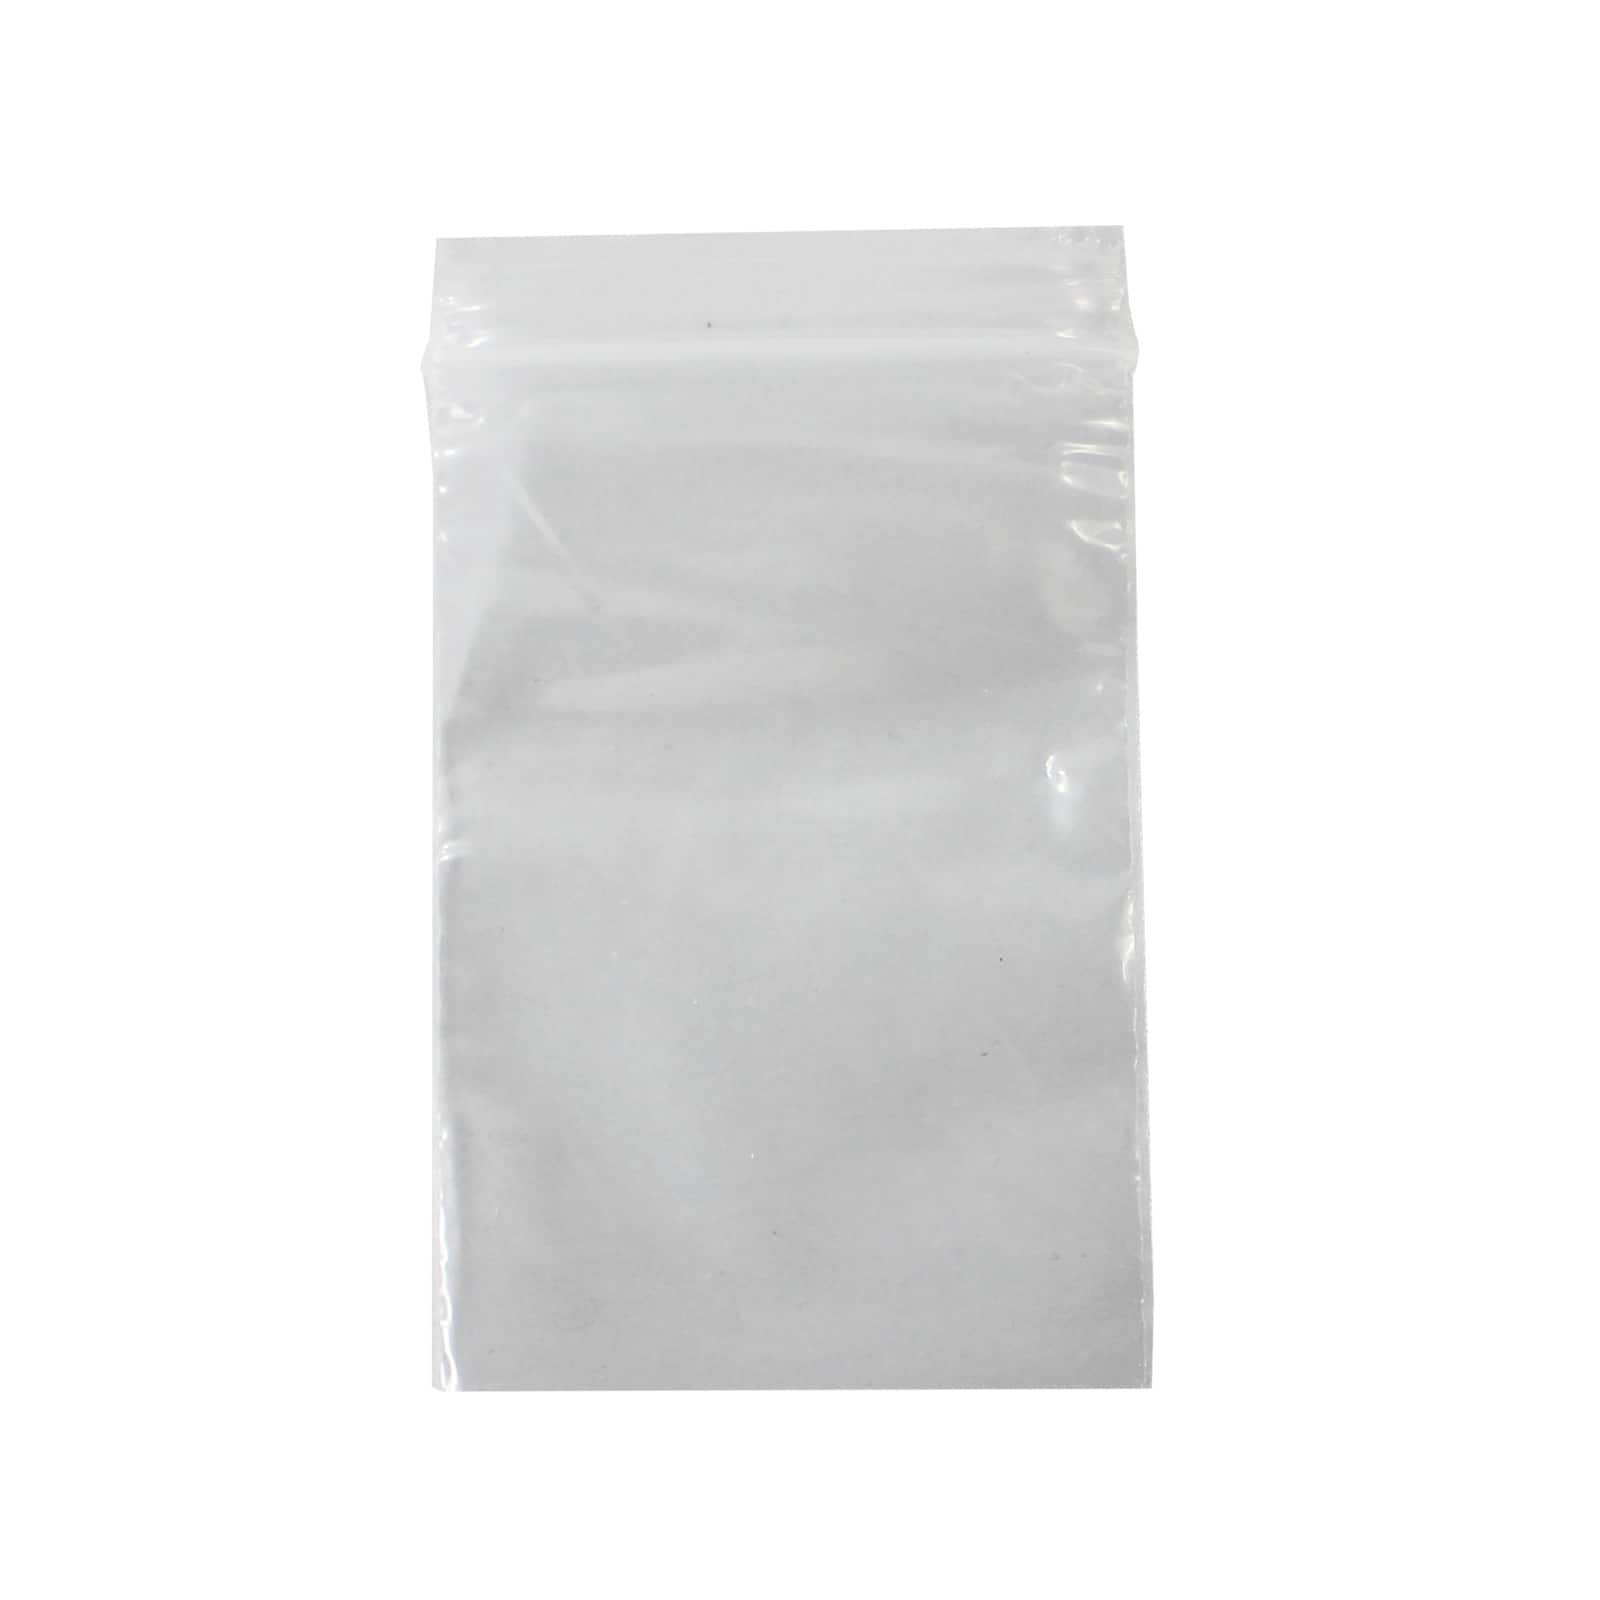 Reusable Zipper Bags Clear 2 Mil 4" x 5" for Jewelry Polybag 32000 Pieces 